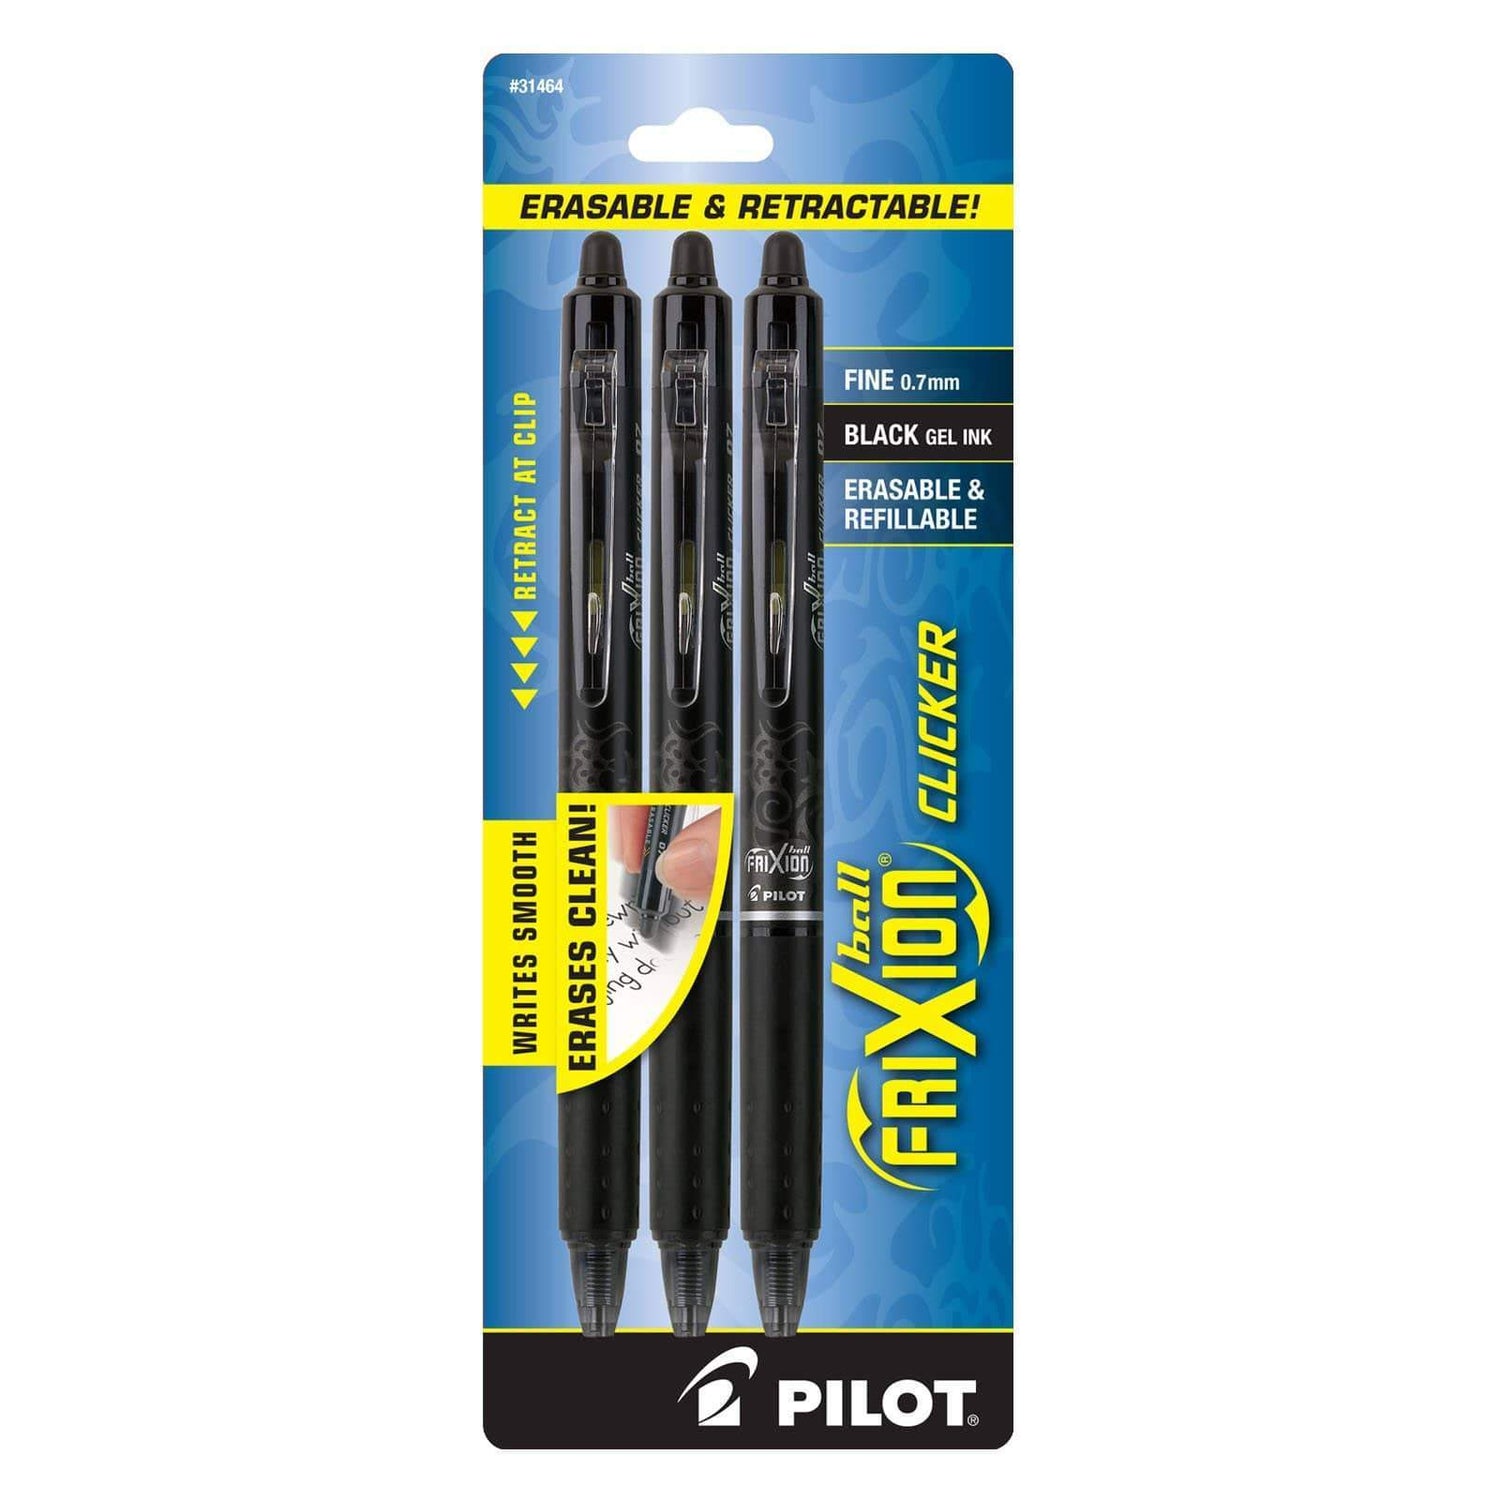 How to open & refill a Pilot FriXion Pen 